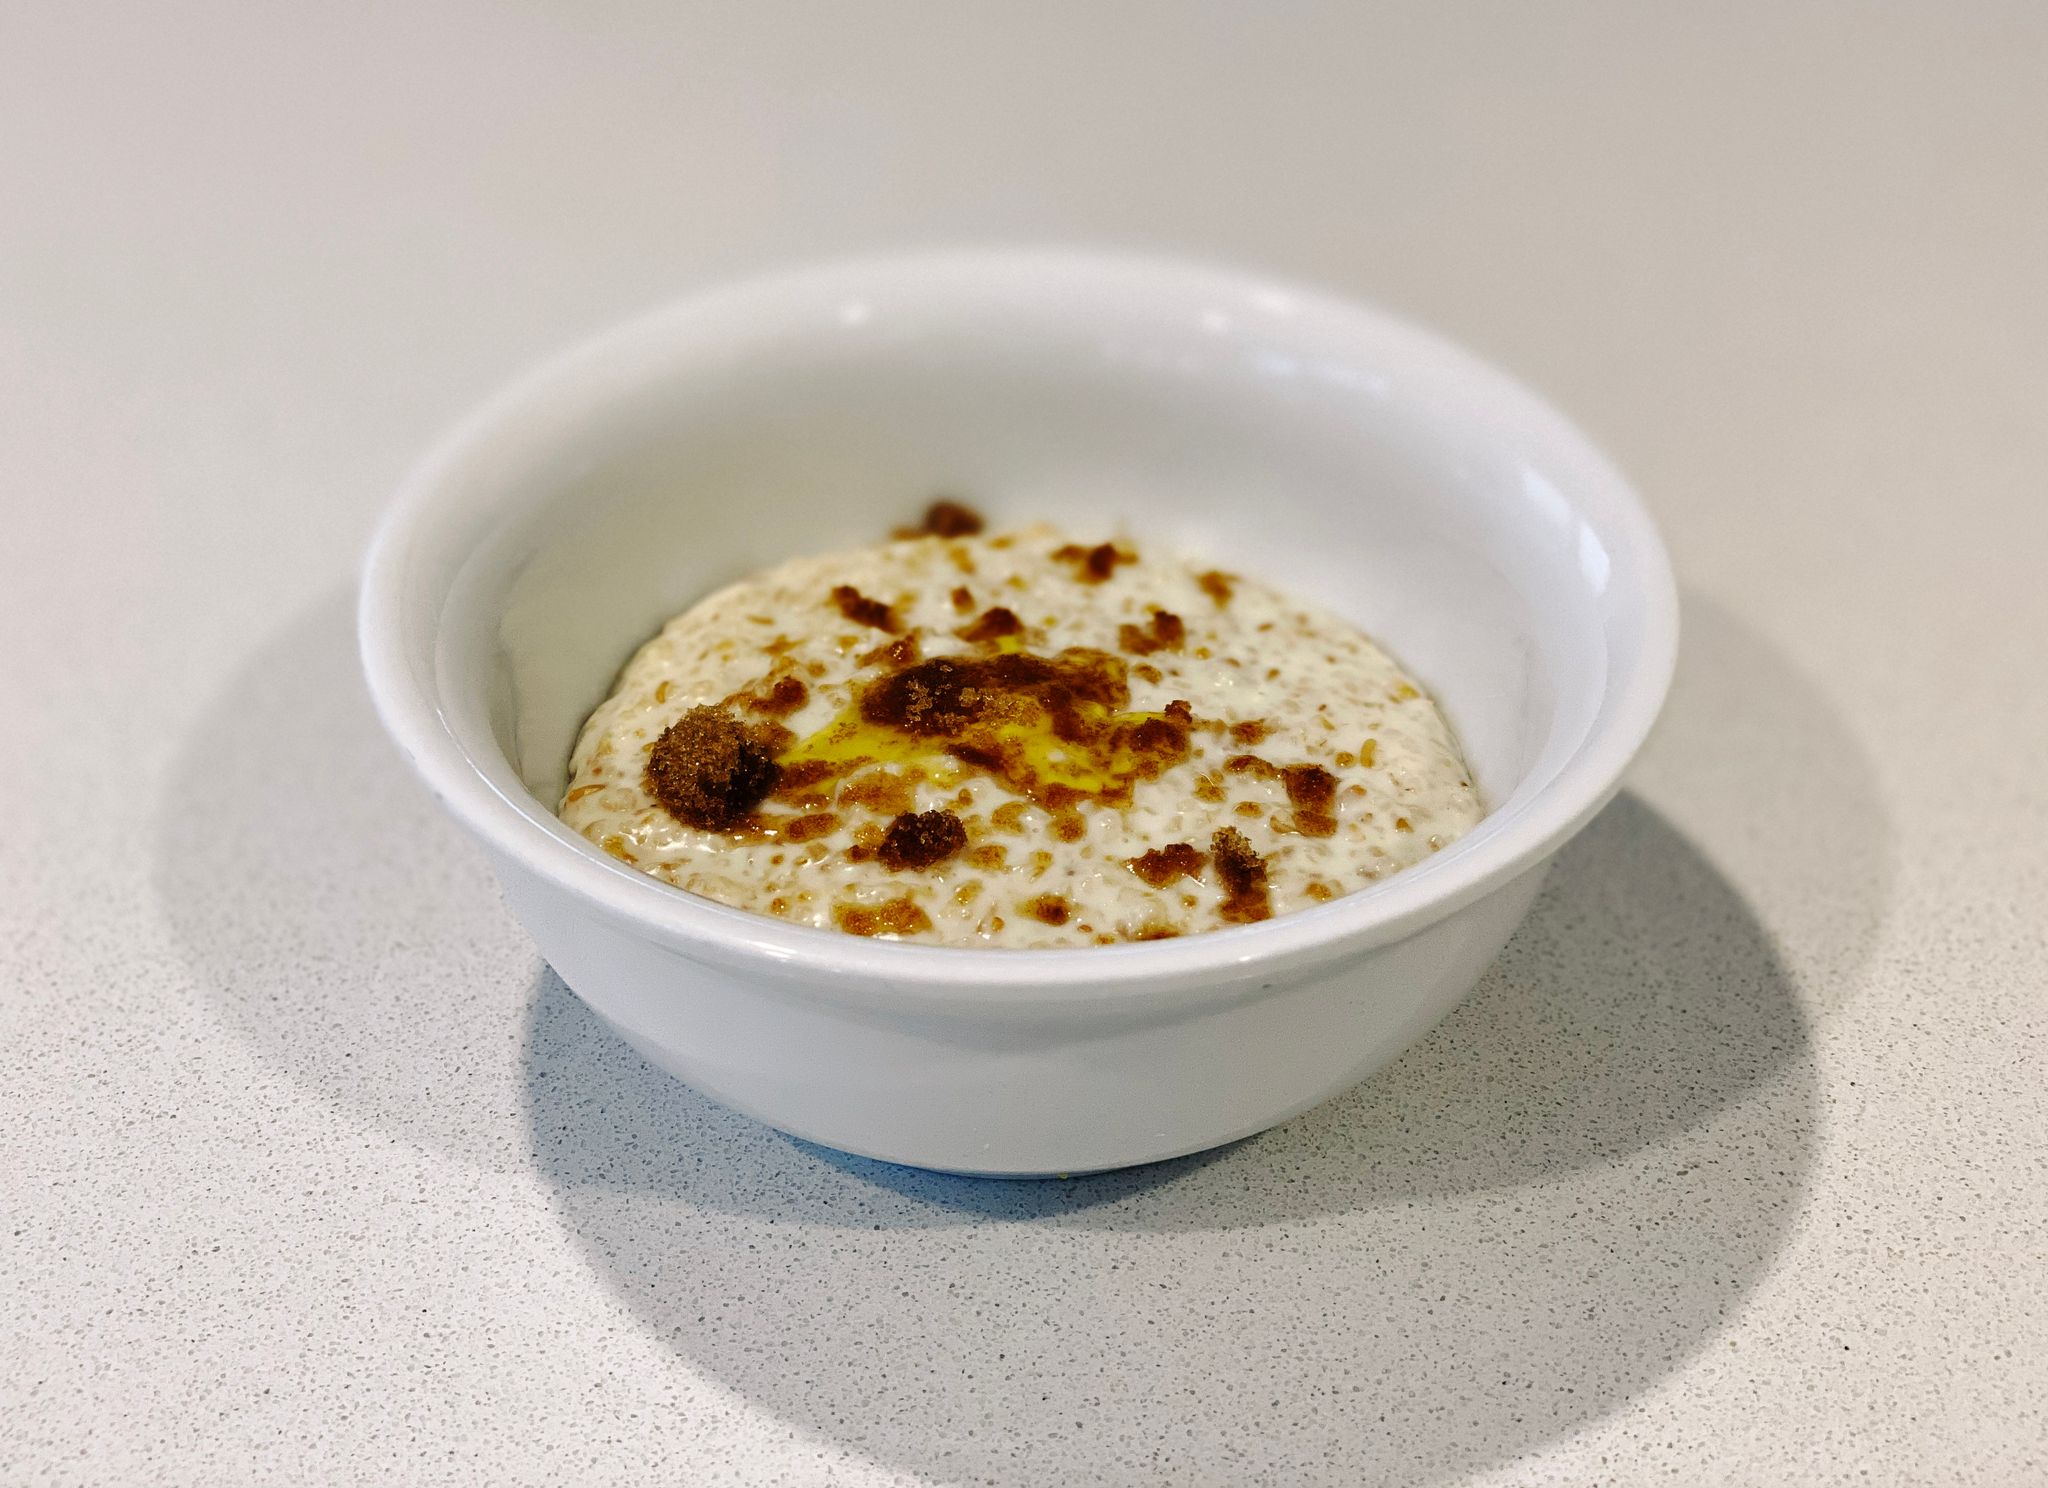 A photo of a bowl of porridge, topped with brown sugar and a bit of butter that's now melted.